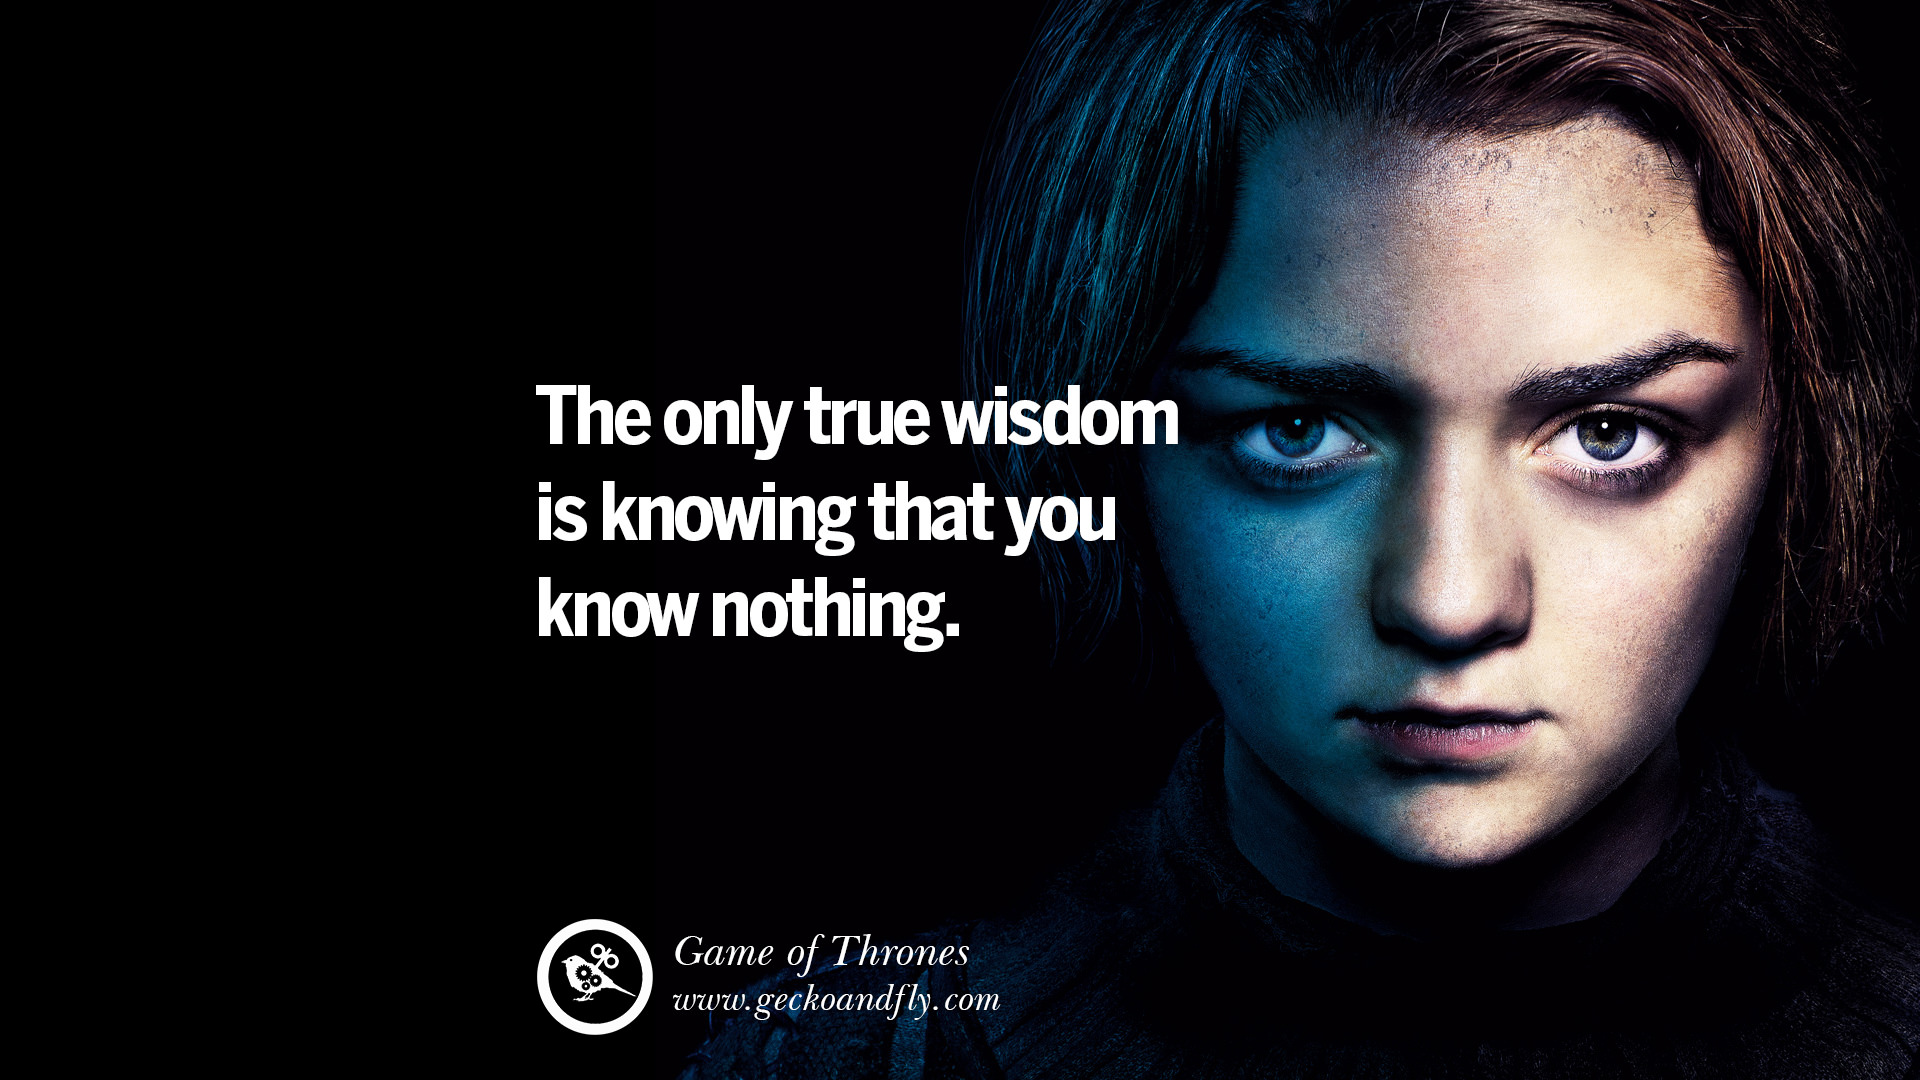 cdn.geckoandfly.com/wp-content/uploads/2015/04/game-of-thrones-quotes-11.jpg